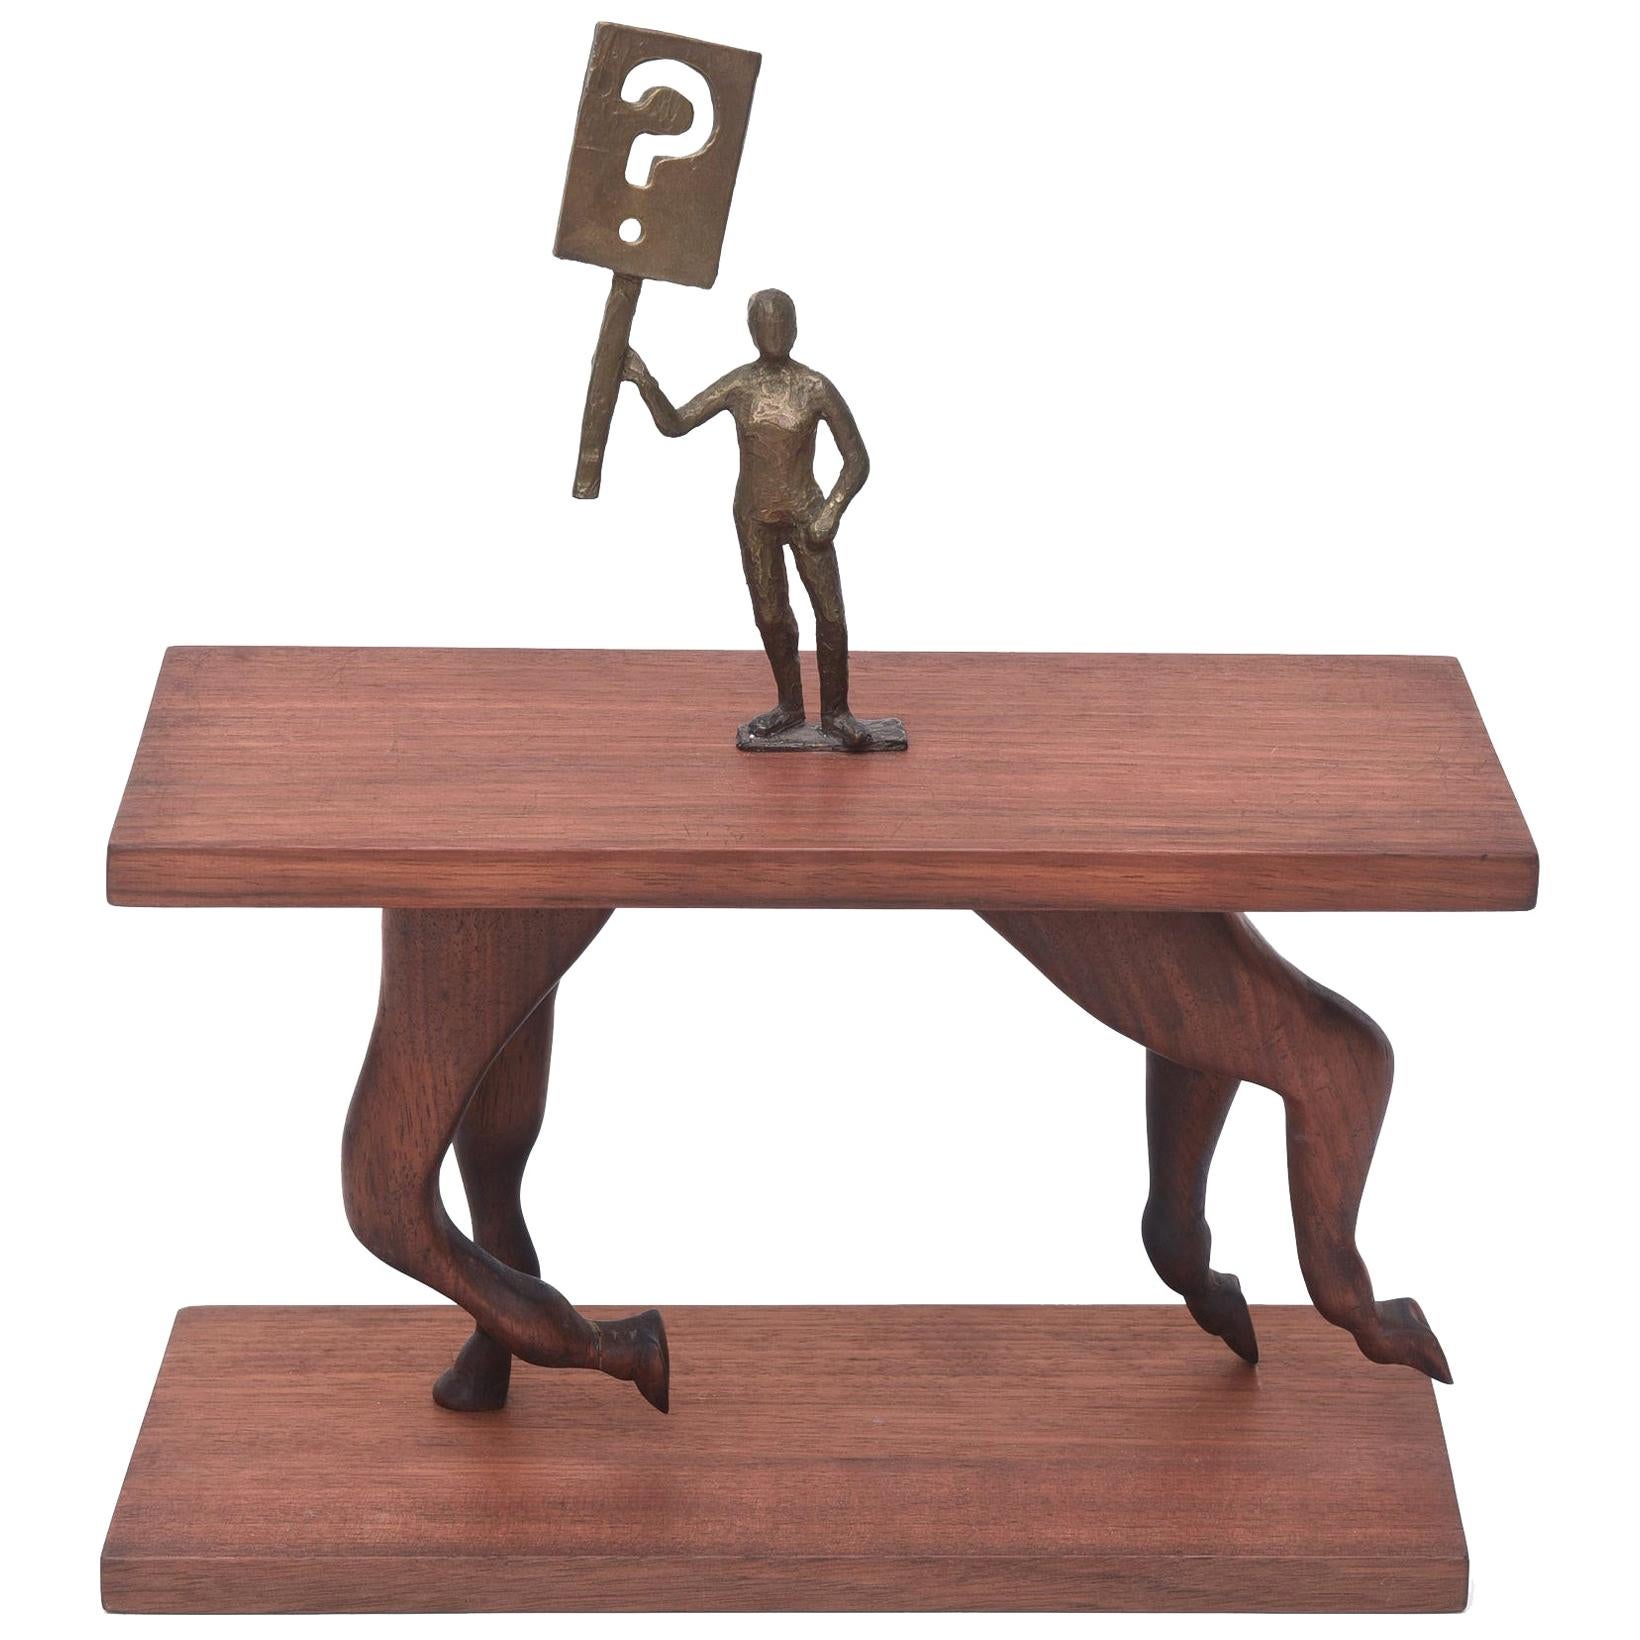 One of a Kind Signed Bronze on Wood Sculpture Titled "Ask a Question" For Sale